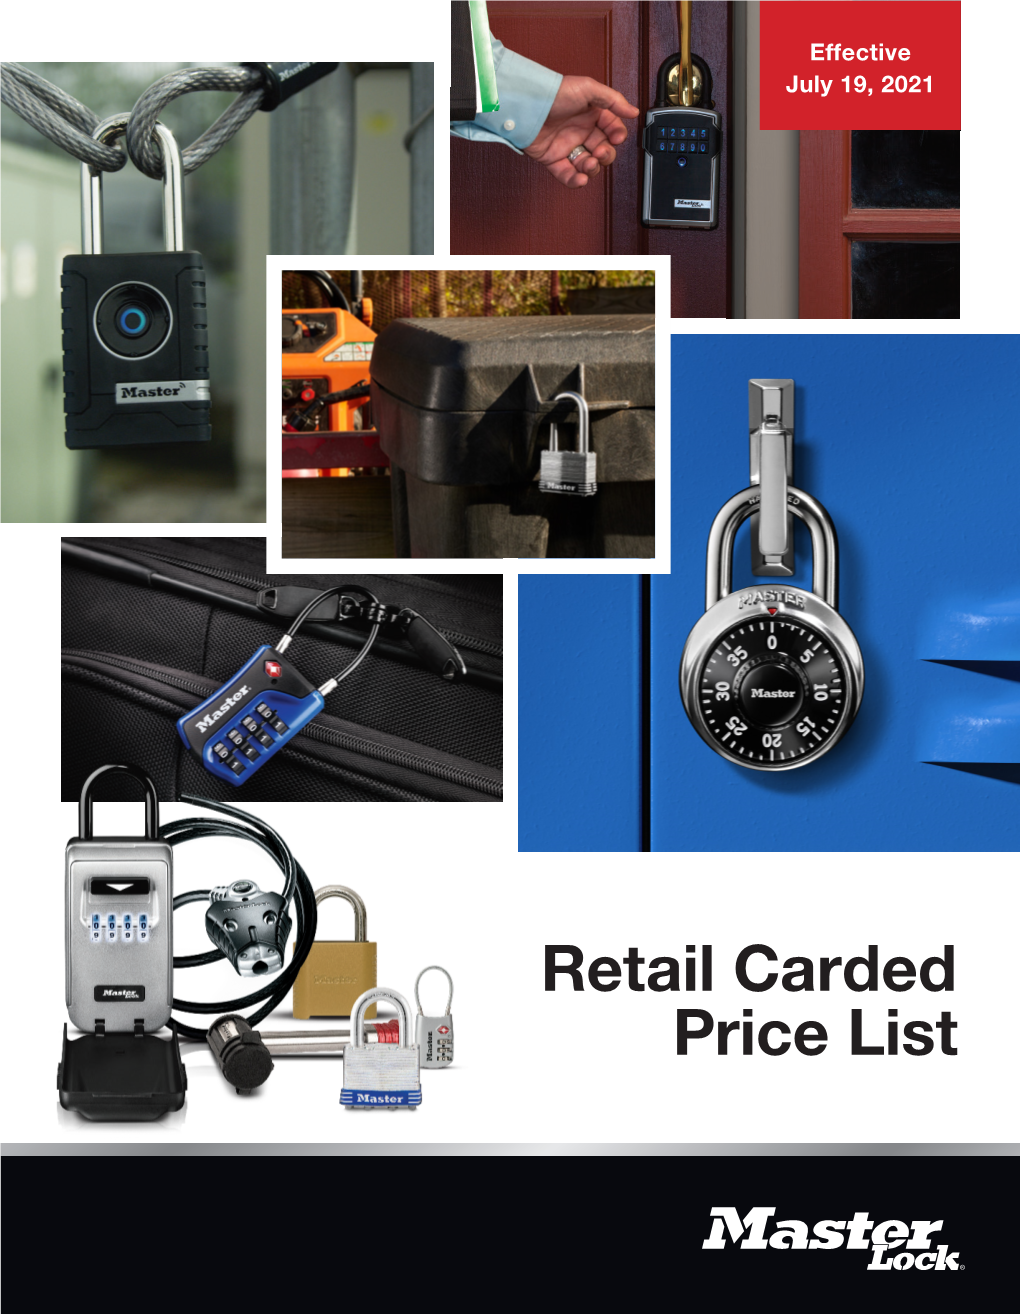 Retail Carded Price List Master Lock Offers the Widest Range of Strong, Easy-To-Use, and Reliable Security Products People Trust to Protect Their Most Valued Assets